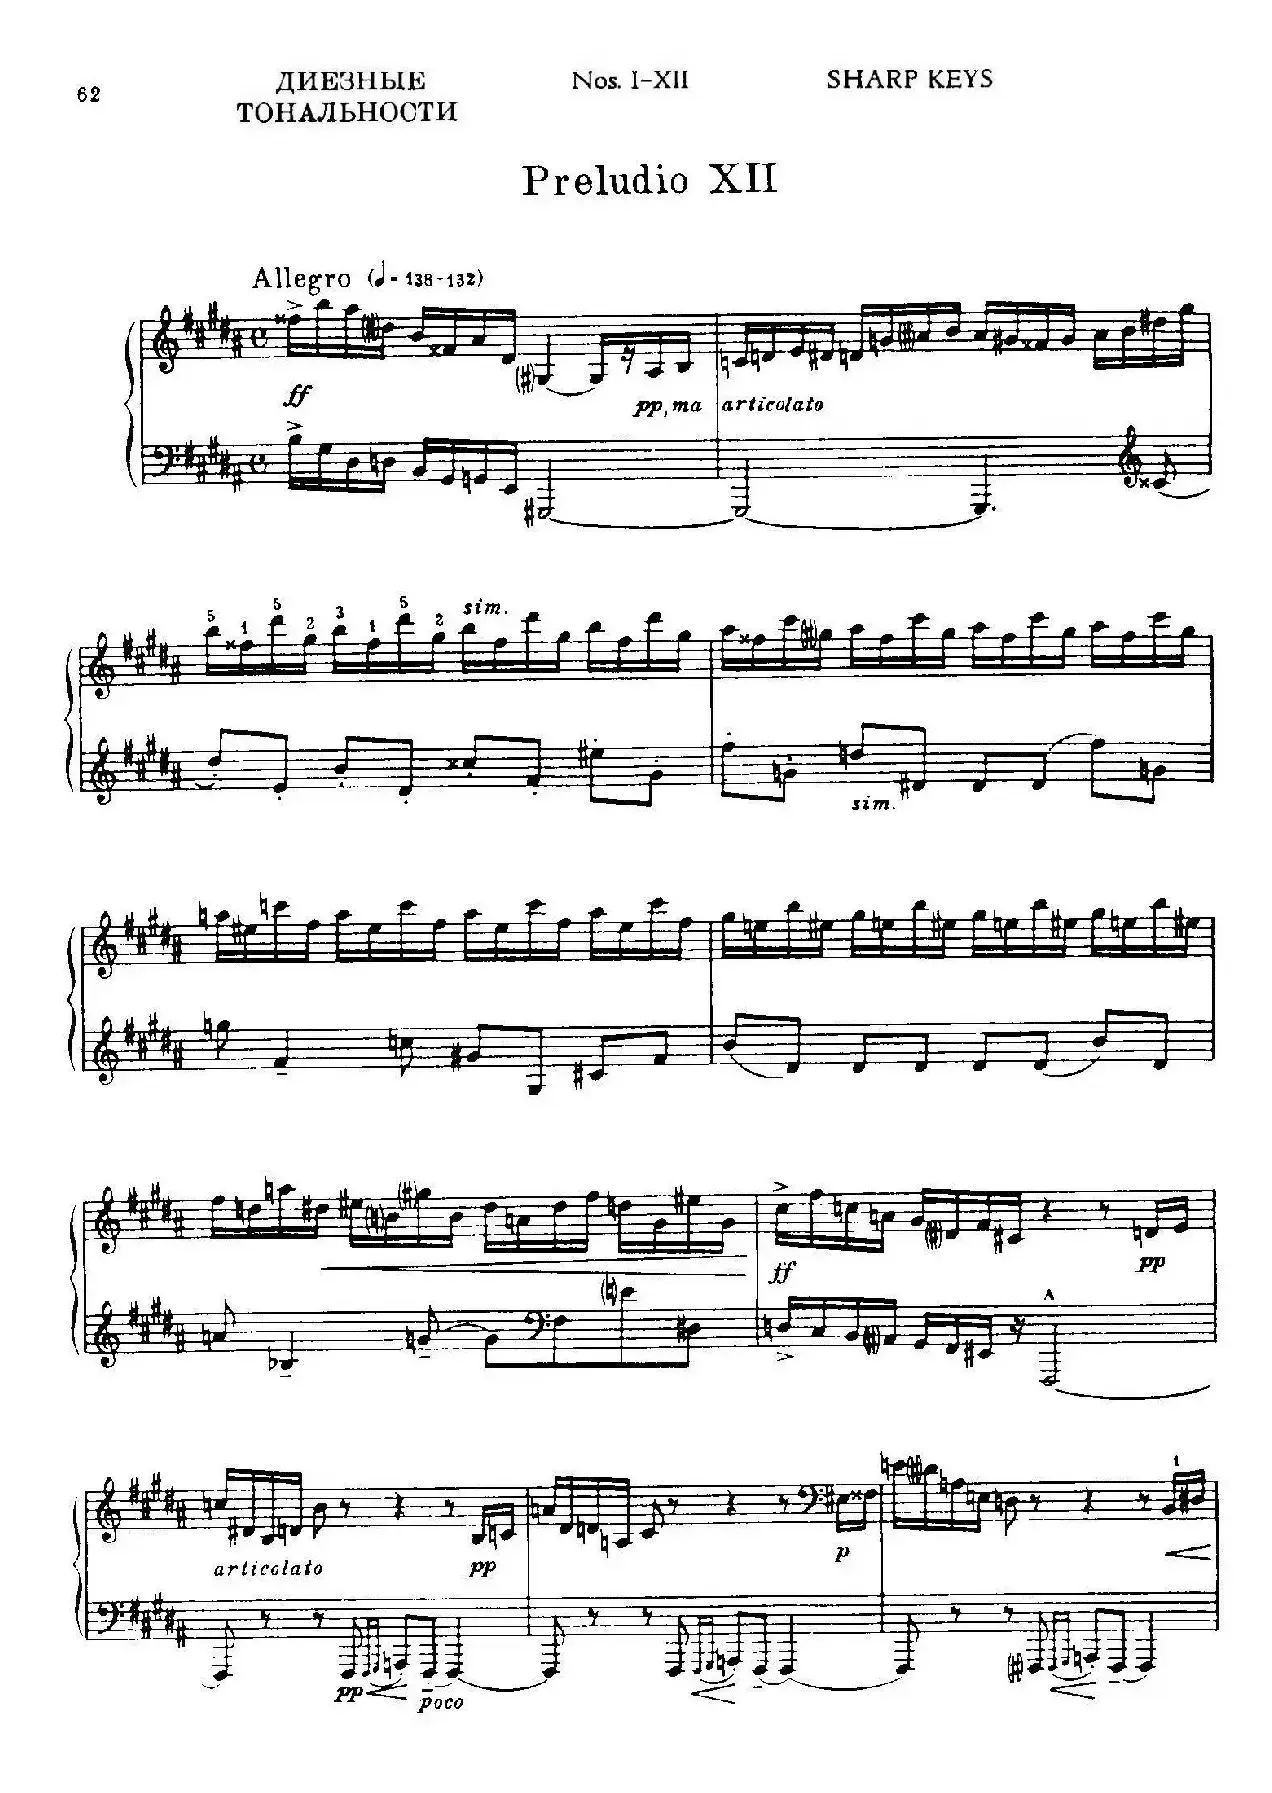 24 Preludes and Fugues Part.1 Op.45（24首前奏曲与赋格·第一部分·12）